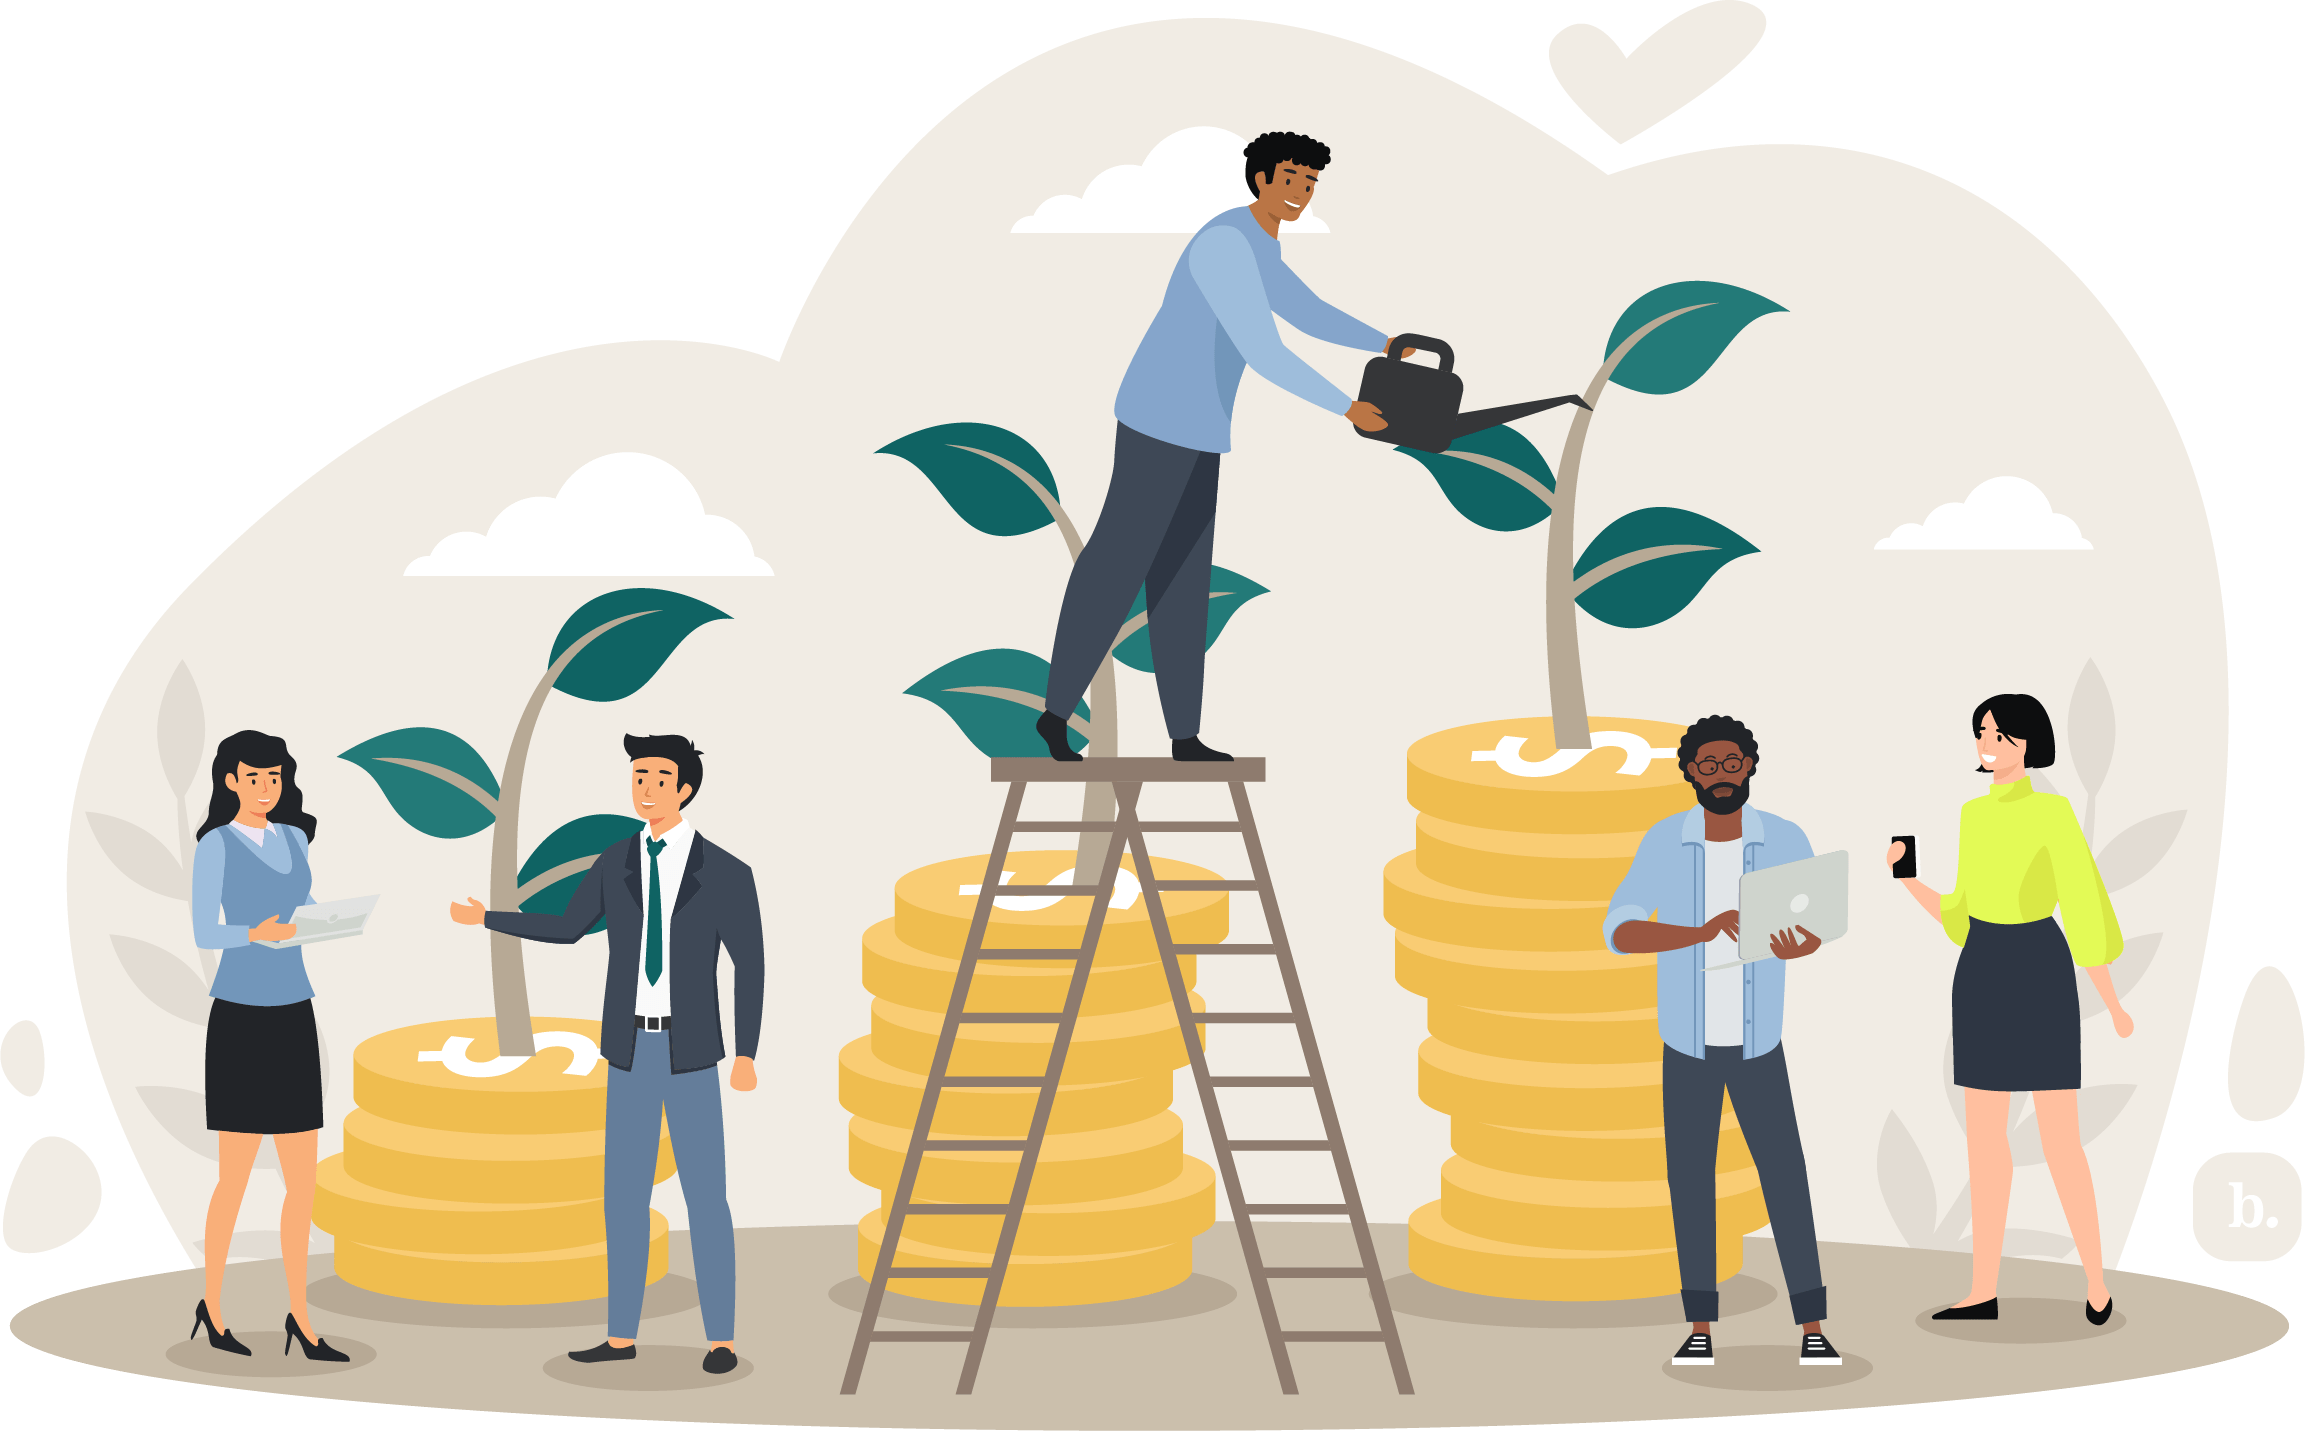 graphic of people standing ona latdder and watering plants growing out of stacks of coins